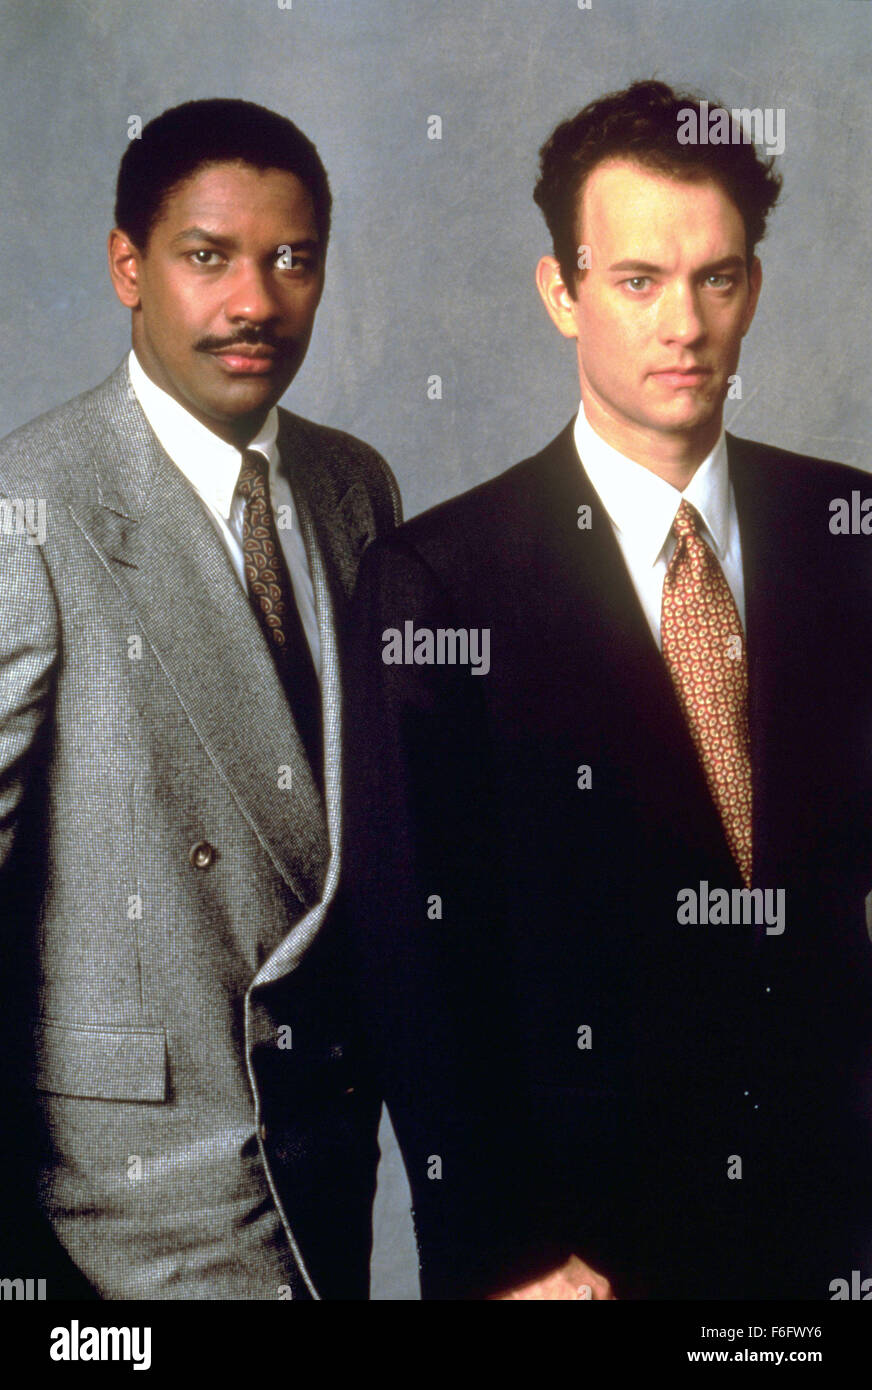 Dec 23, 1993; Hollywood, CA, USA; DENZEL WASHINGTON (left) as Joe Miller and TOM HANKS as Andrew Beckett in the drama ''Philadelphia'' directed by Jonathan Demme. Stock Photo